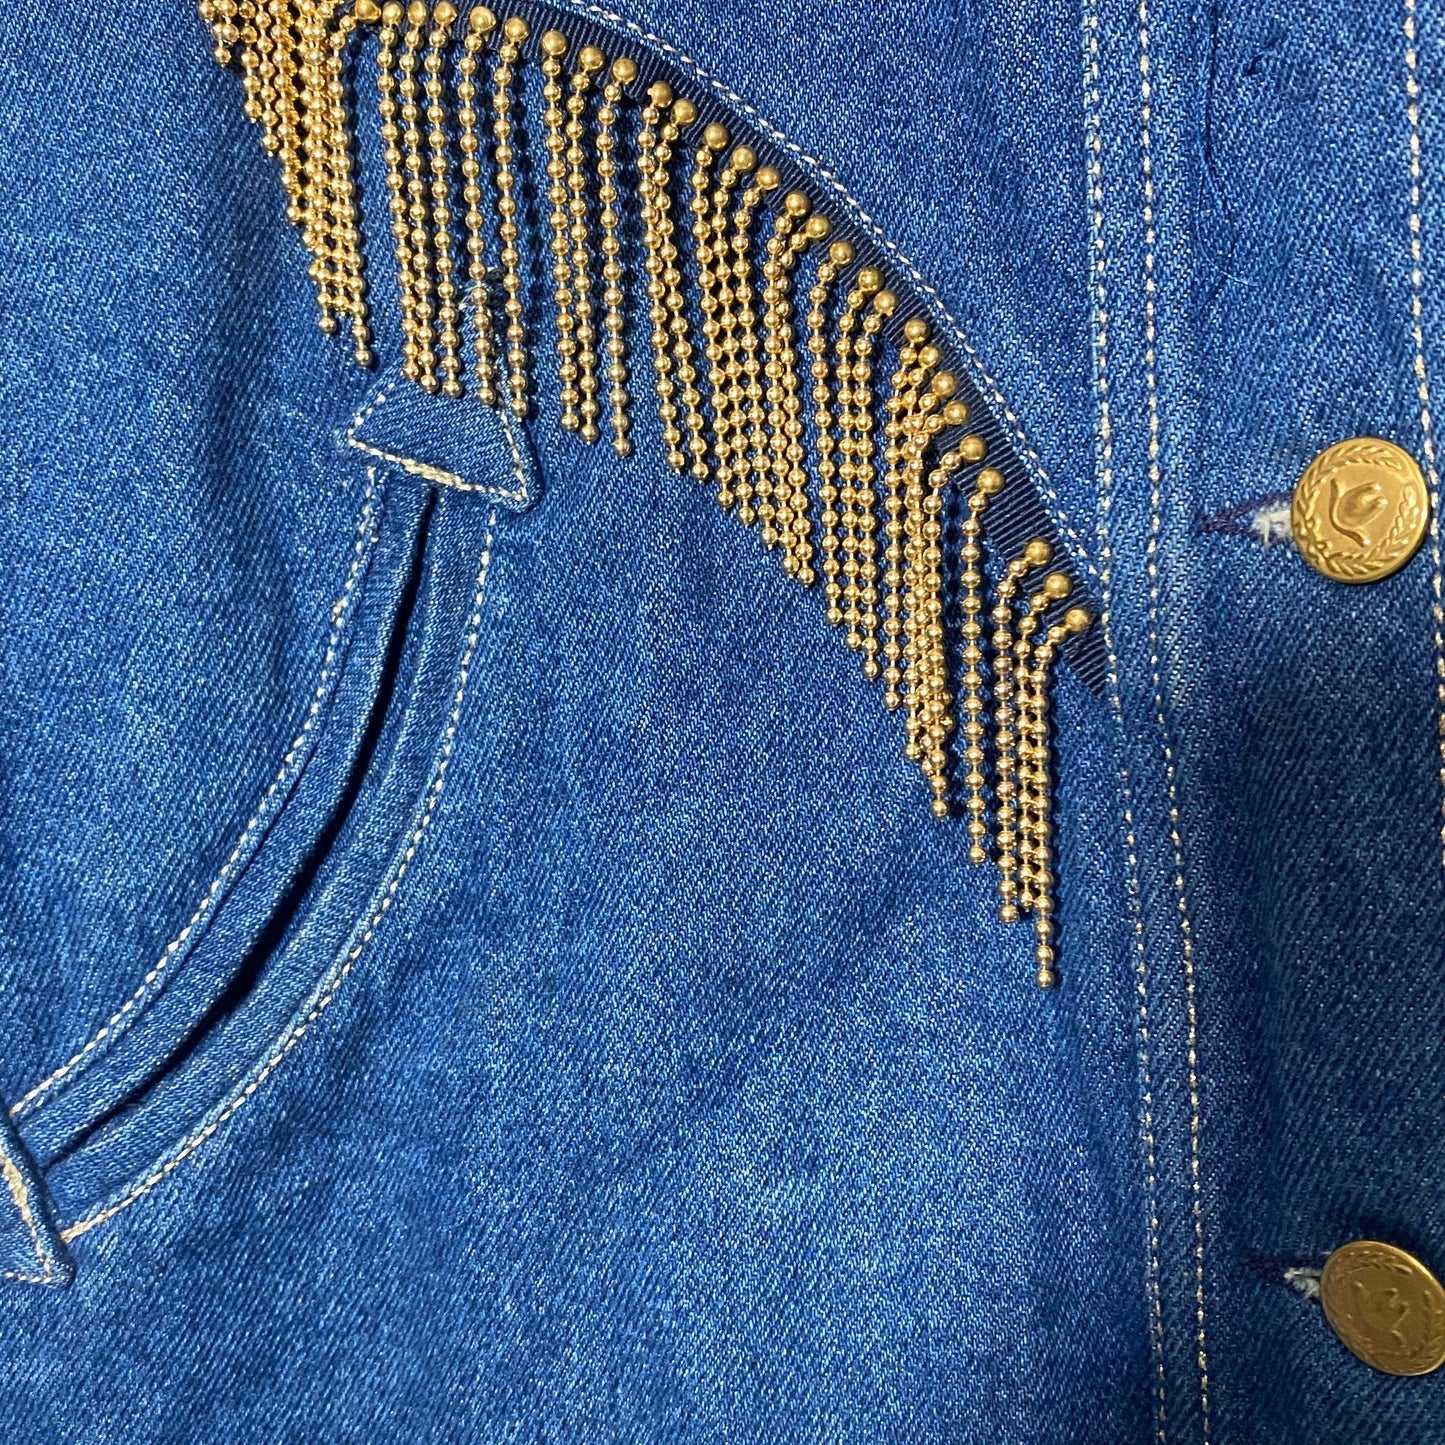 Moschino Jeans rare cowboy style denim jacket with golden fringes, collectible piece, 90z and mint